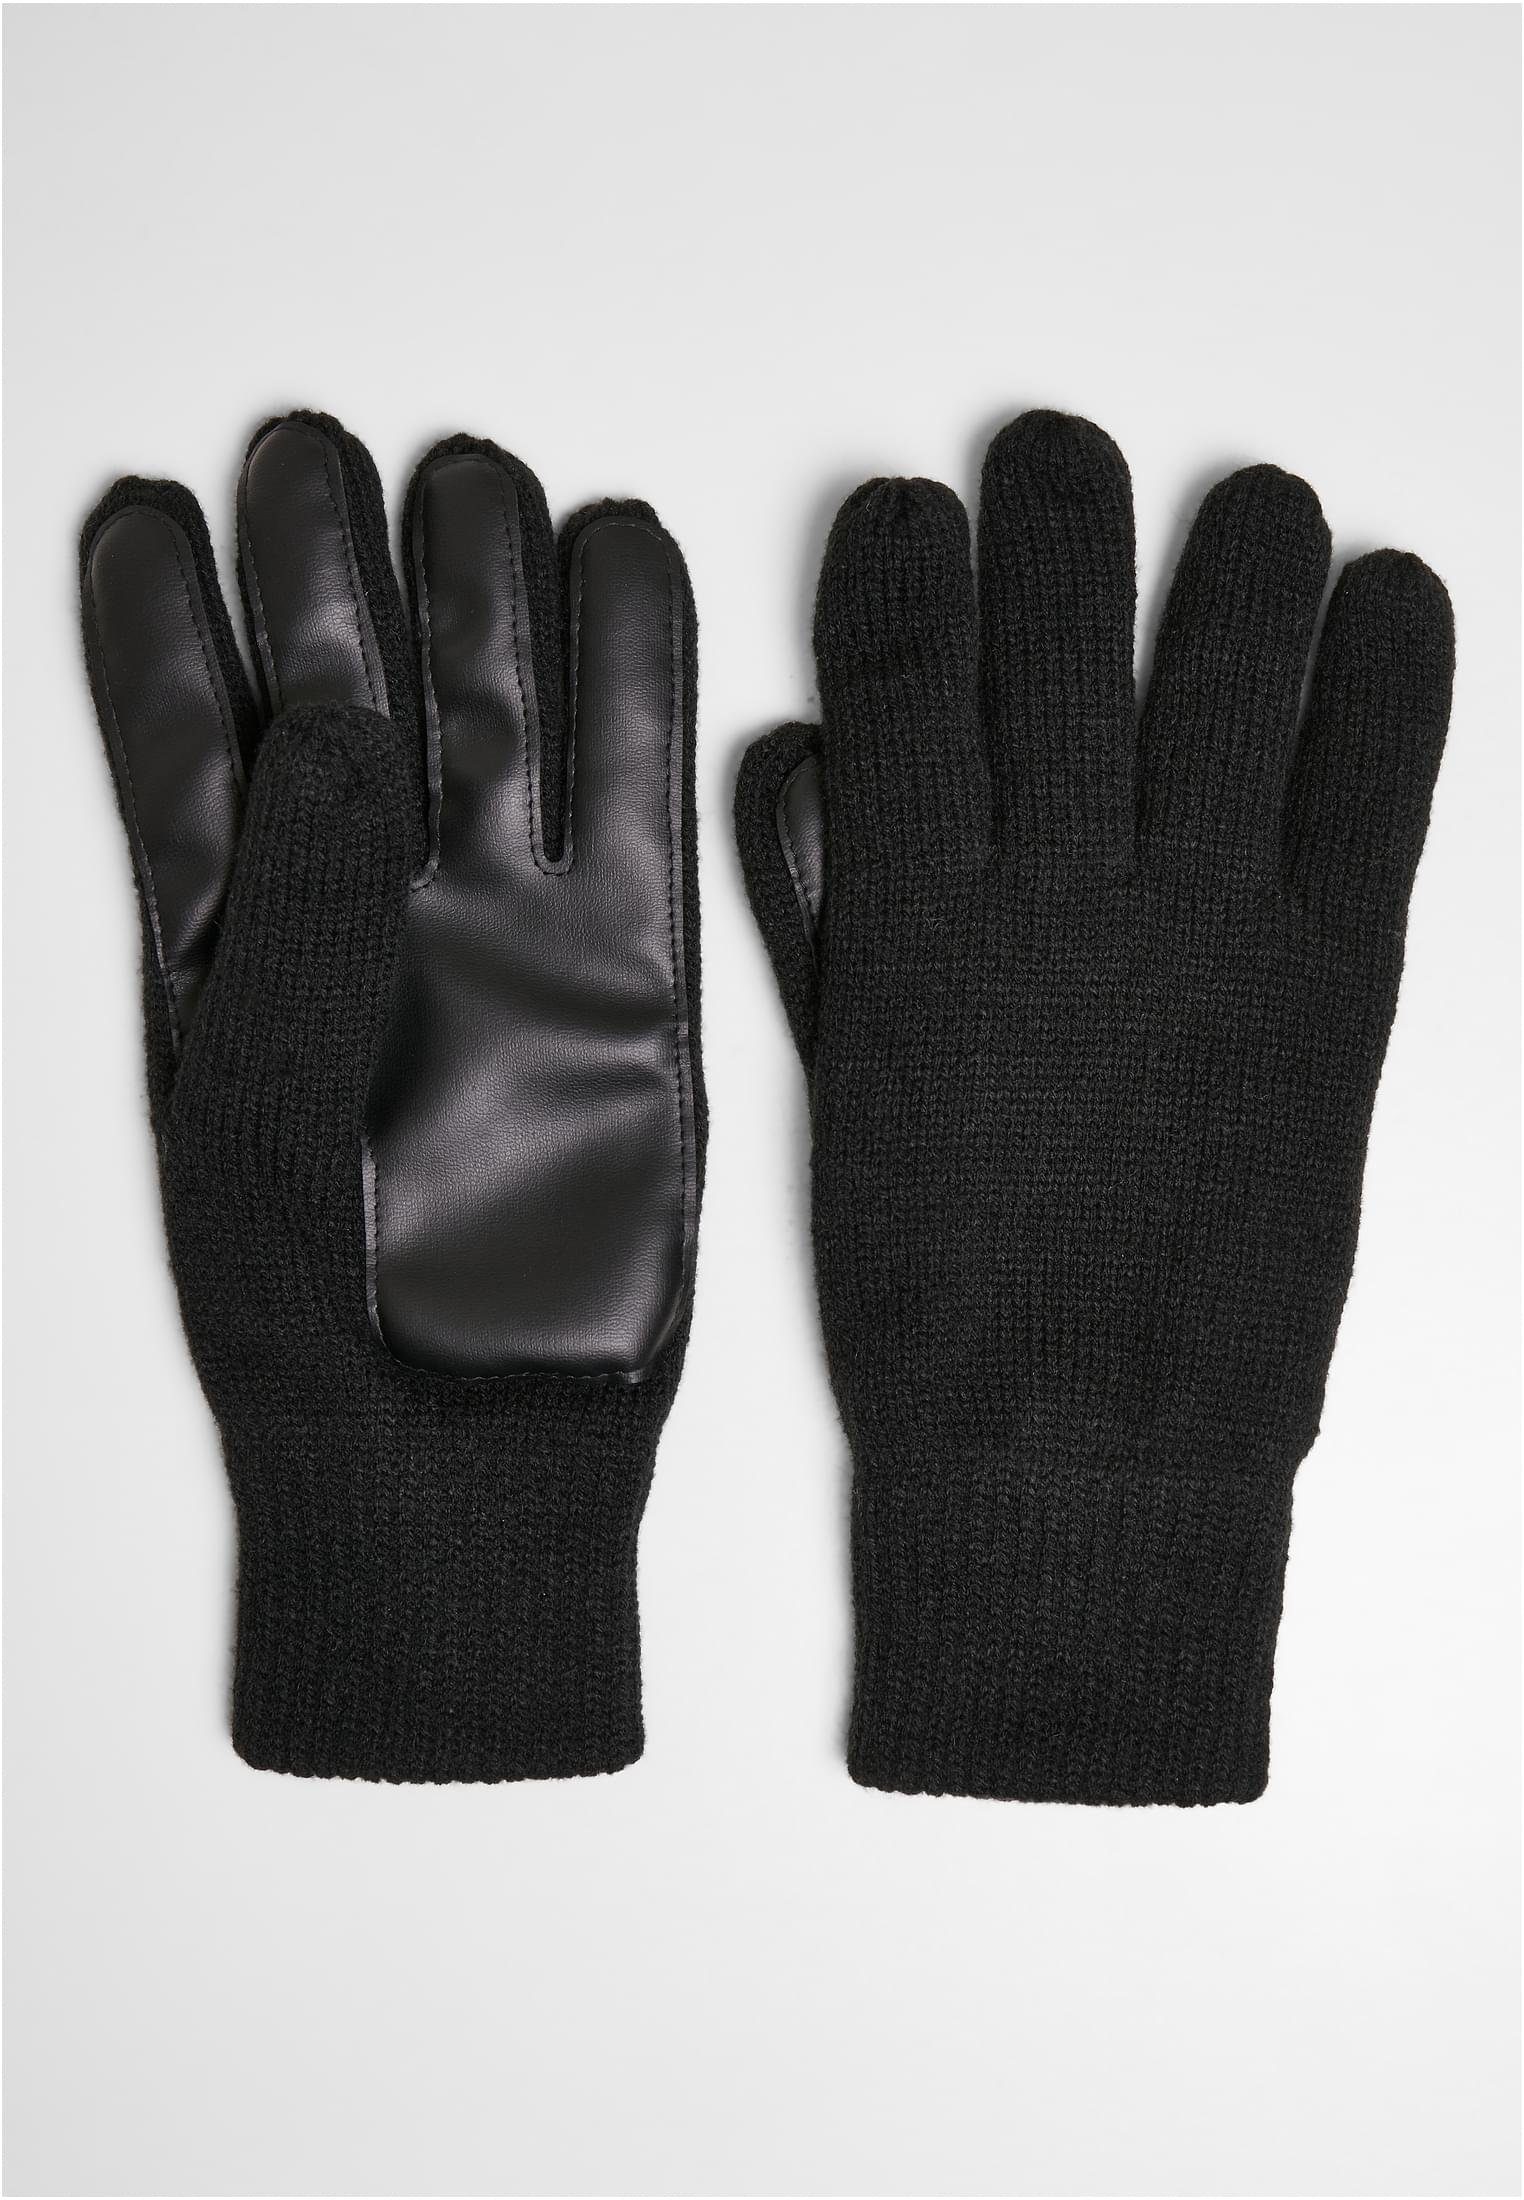 CLASSICS Unisex Synthetic Leather Knit Baumwollhandschuhe Gloves URBAN